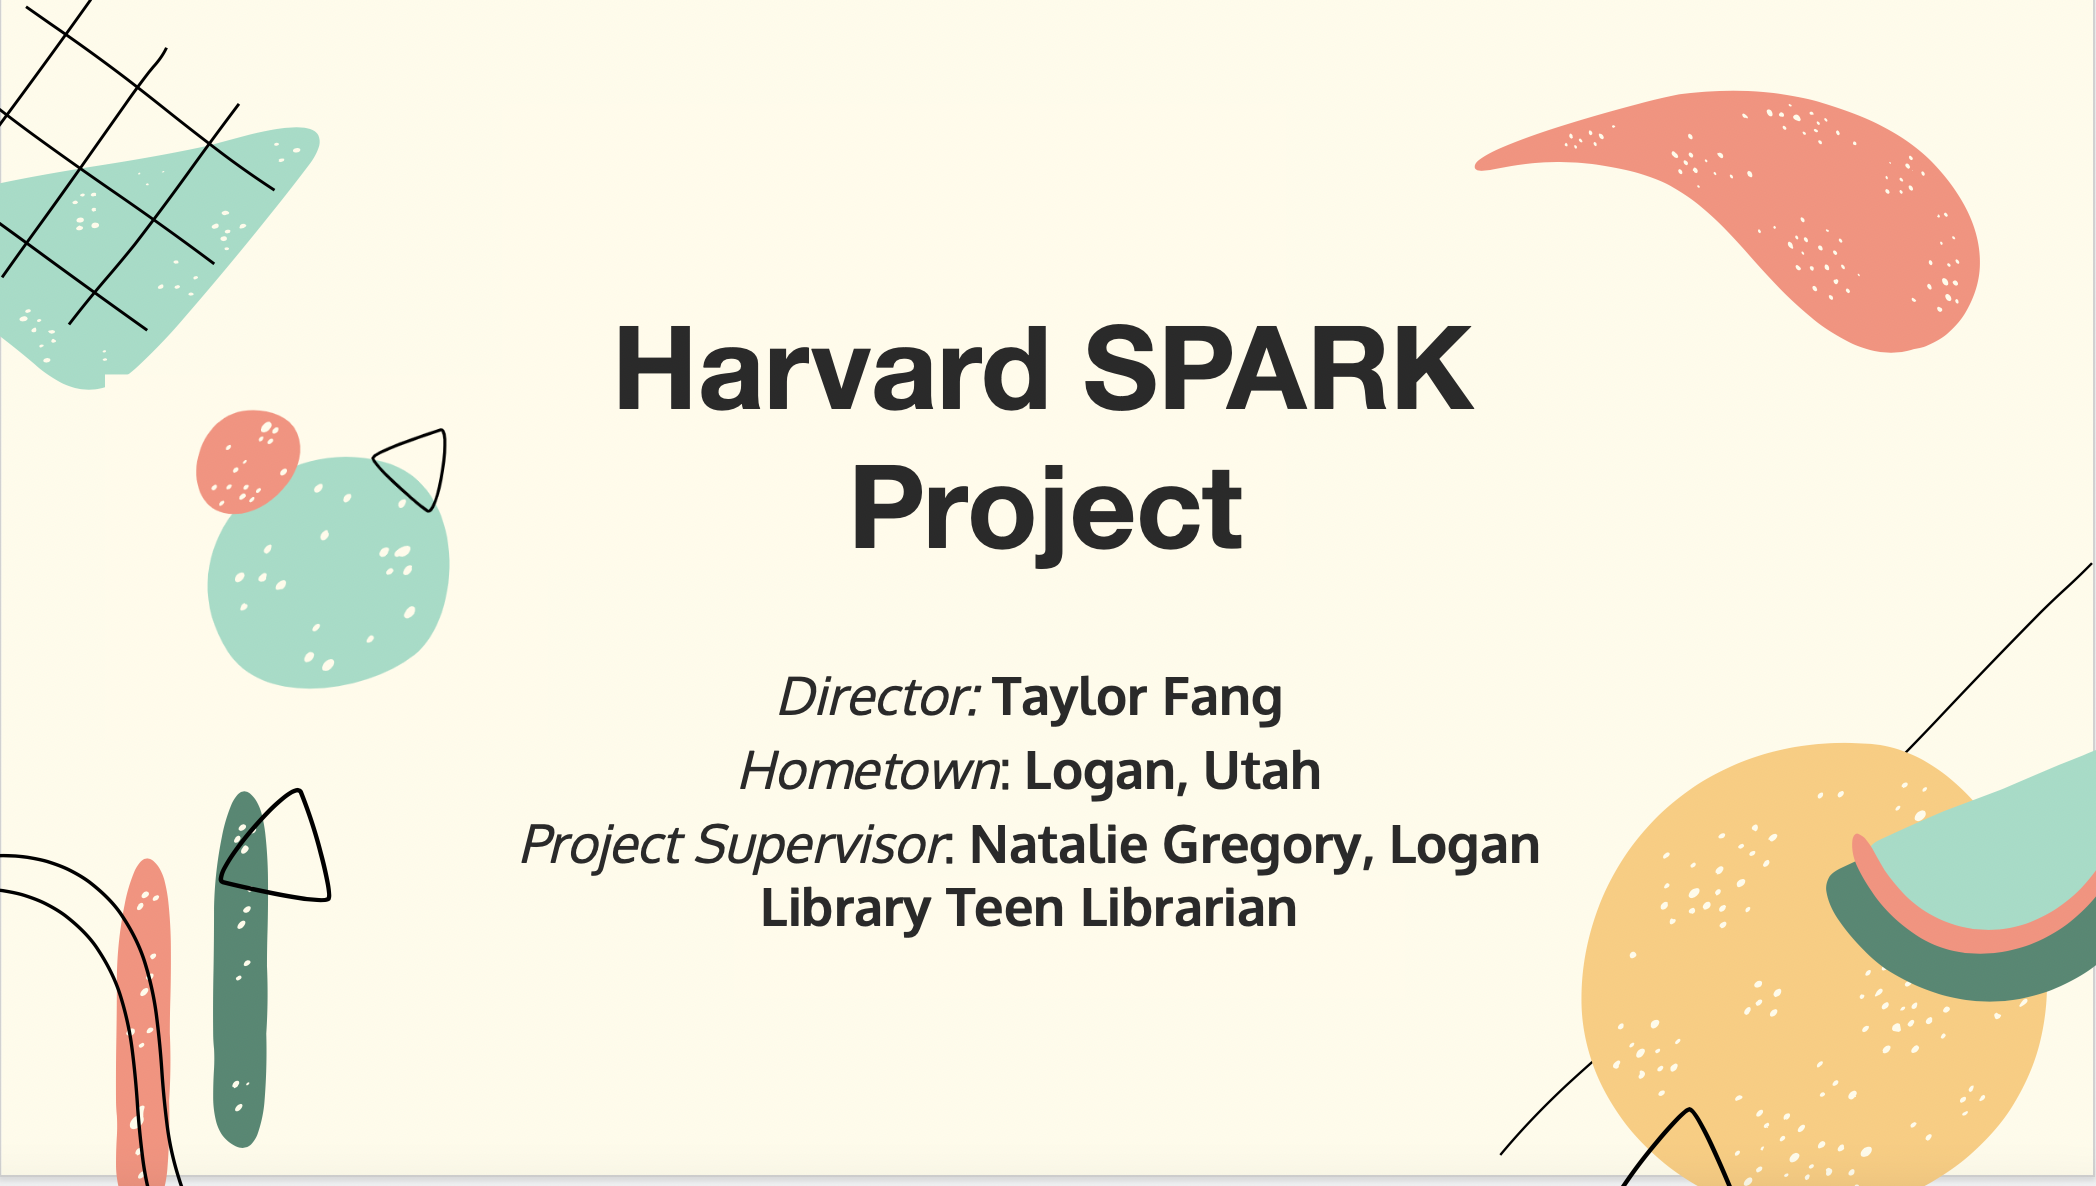 Harvard Public Service and Engaged Scholarship, SPARK Fellow